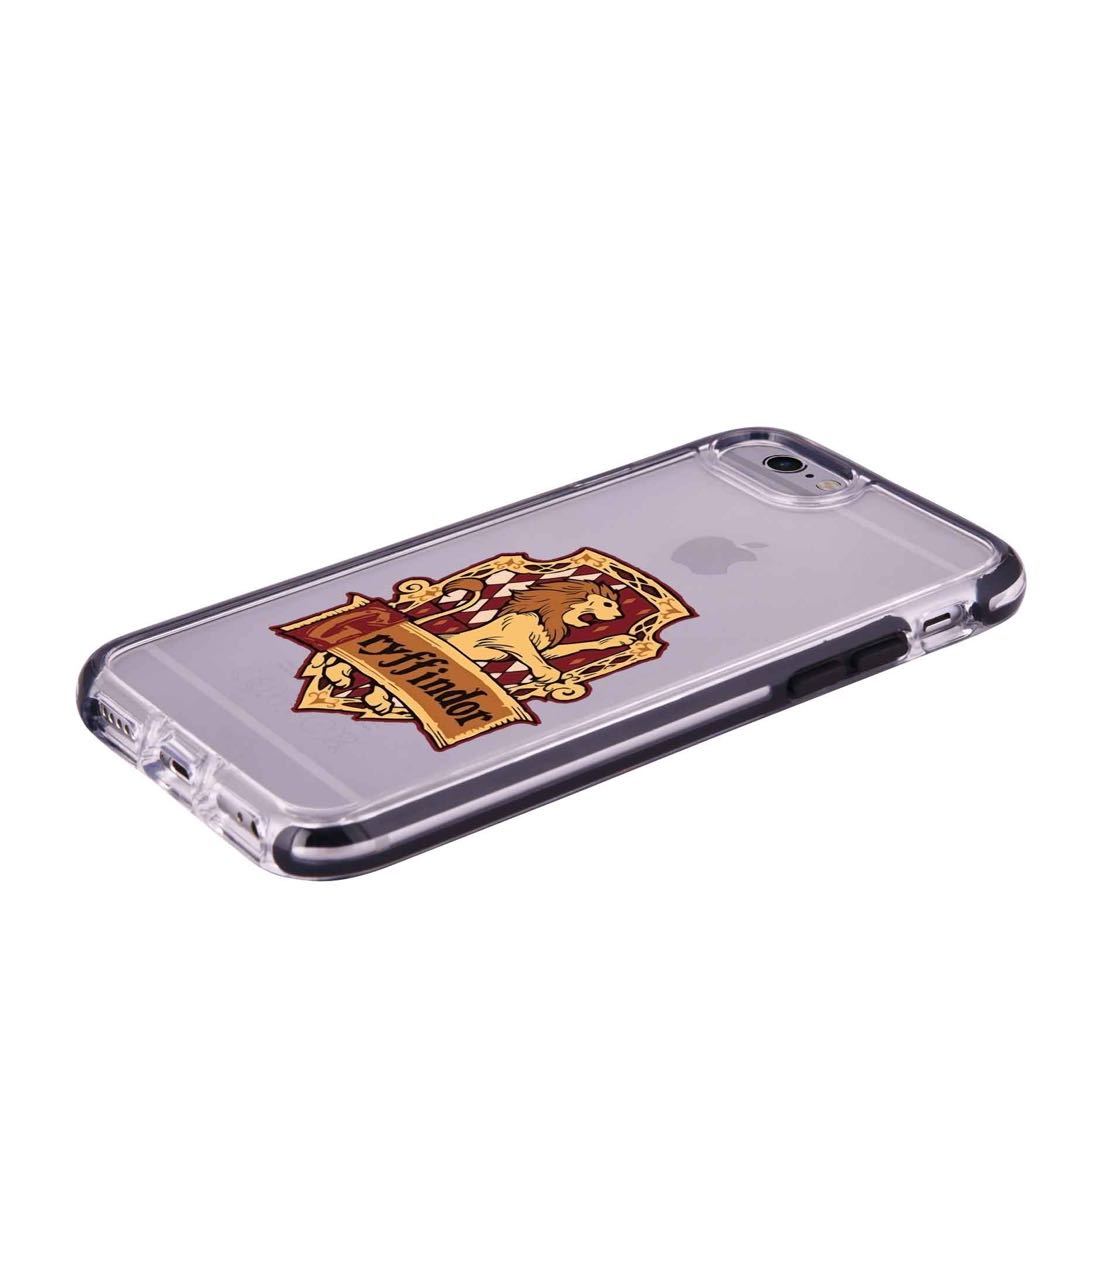 Crest Gryffindor - Extreme Phone Case for iPhone 6S Plus